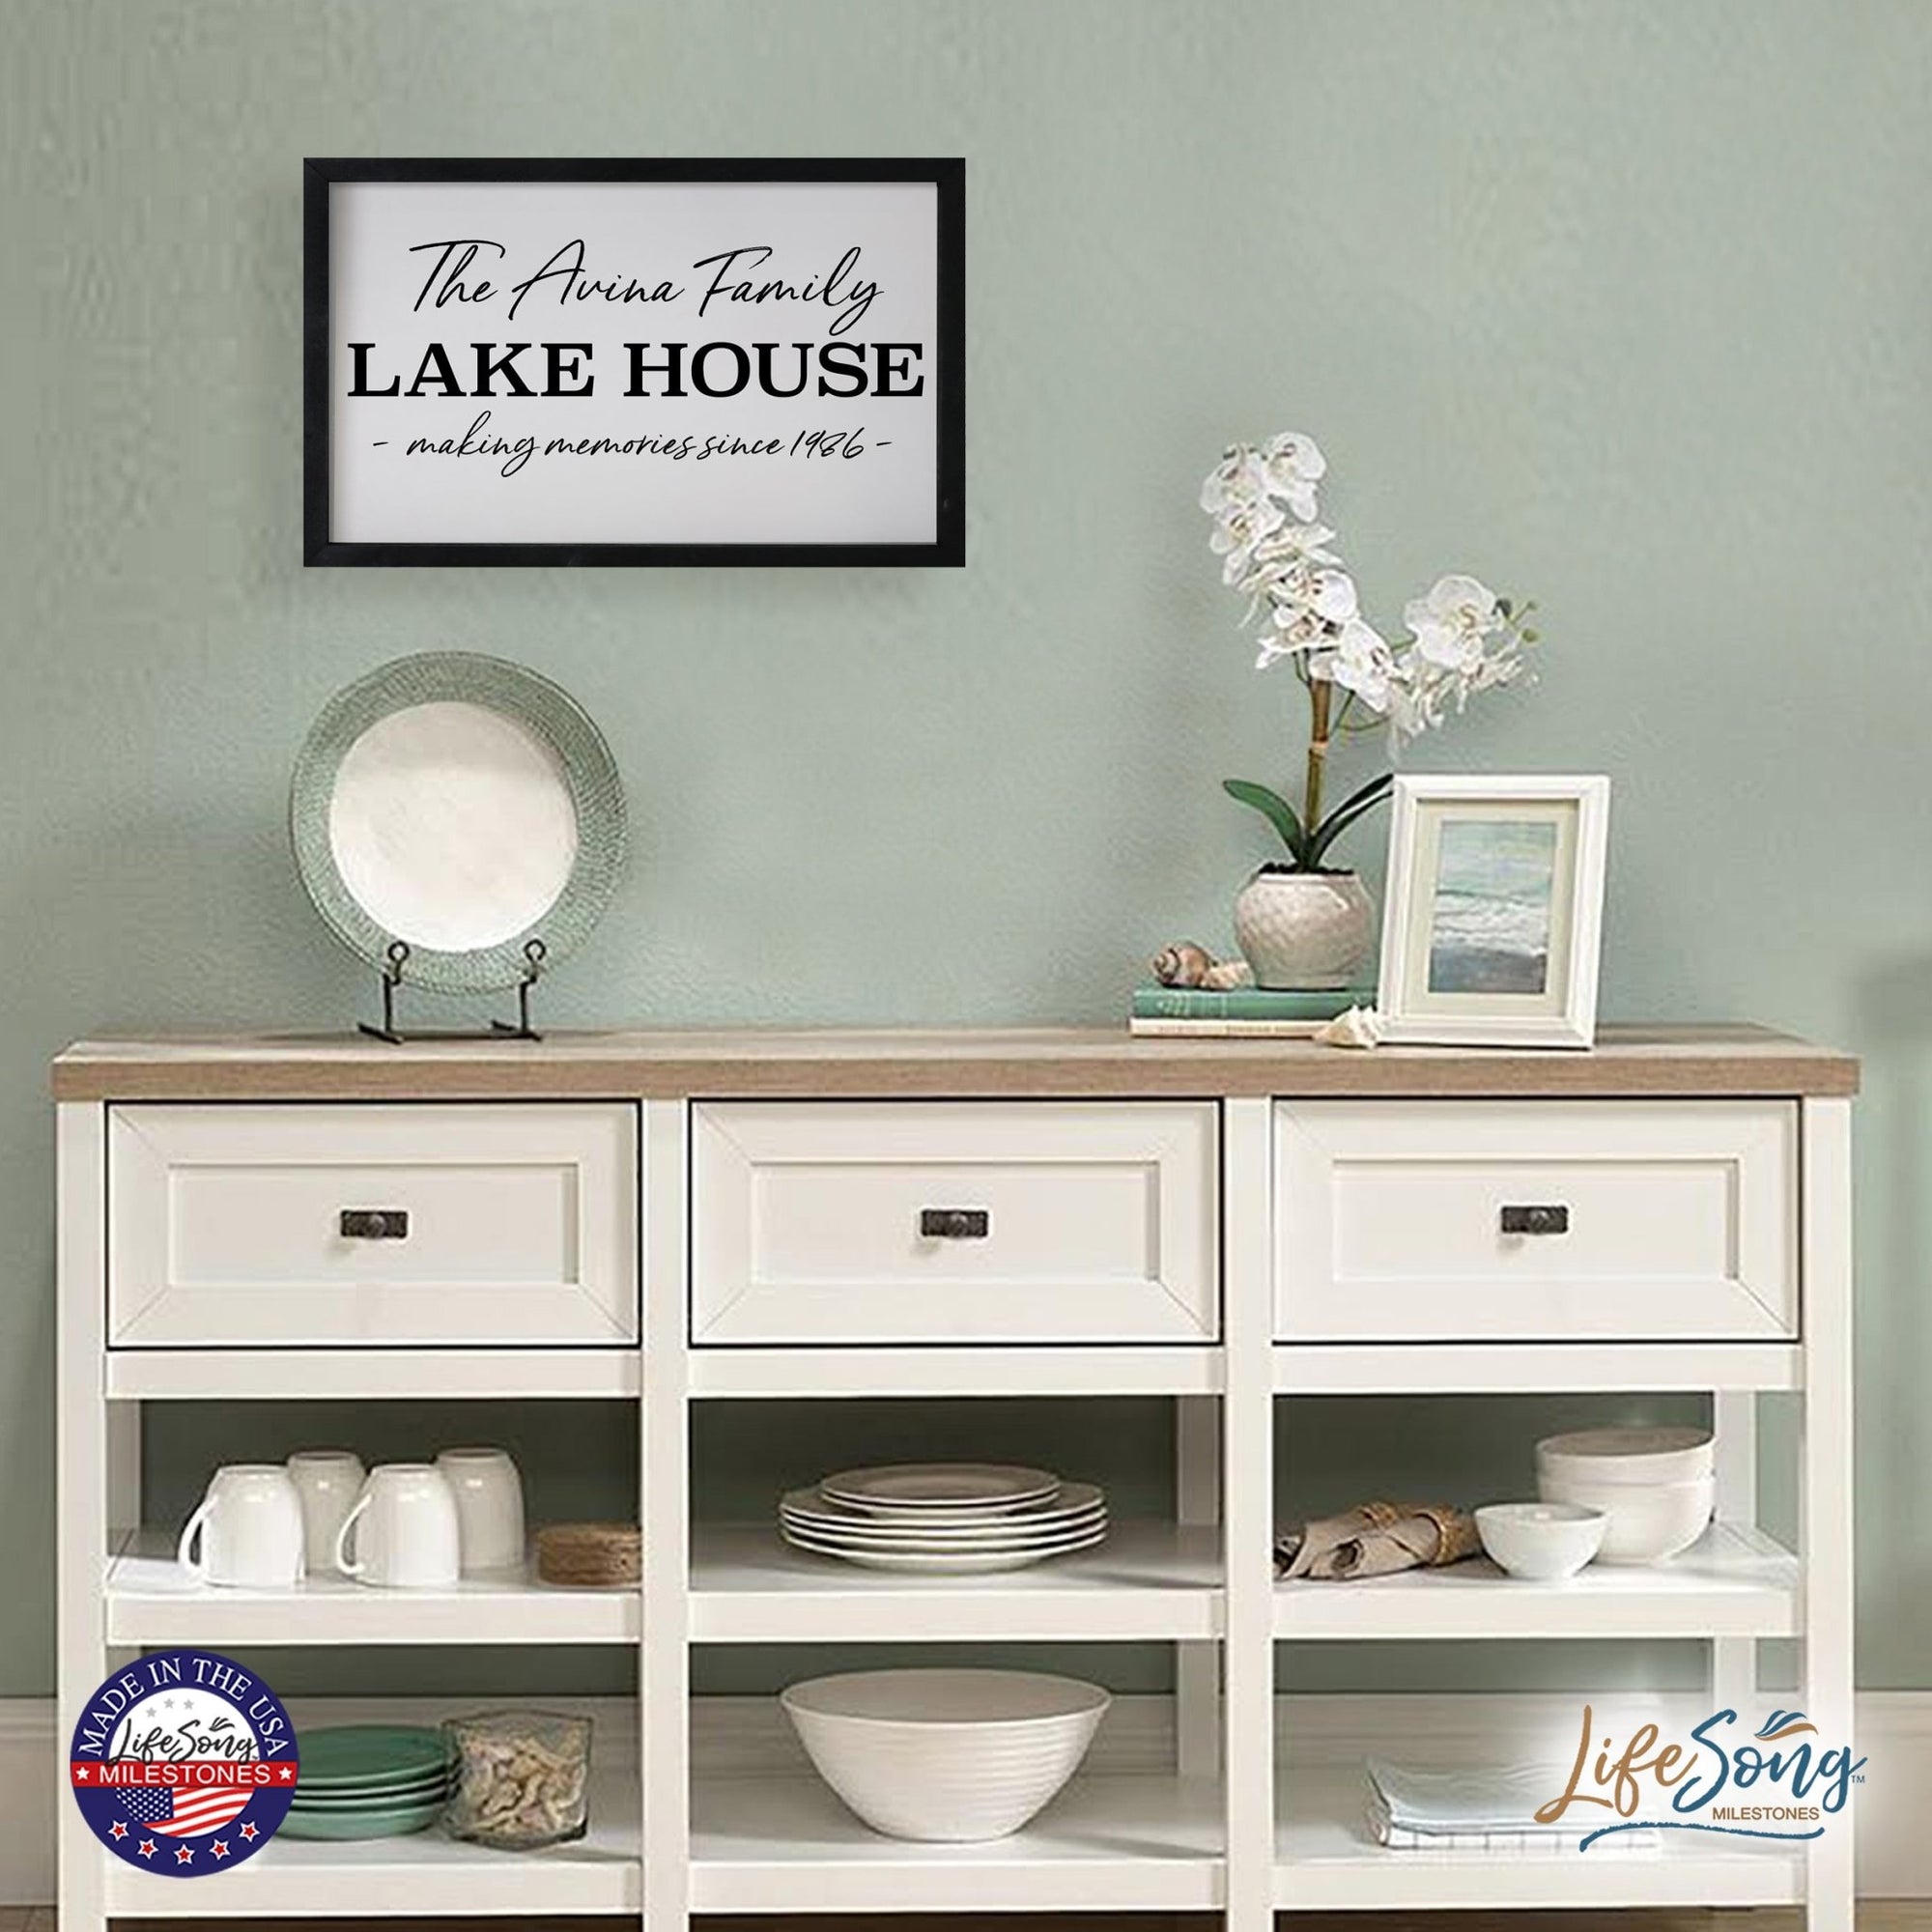 Inspirational Personalized Framed Shadow Box 16x25 - Lake House Making Memories - LifeSong Milestones